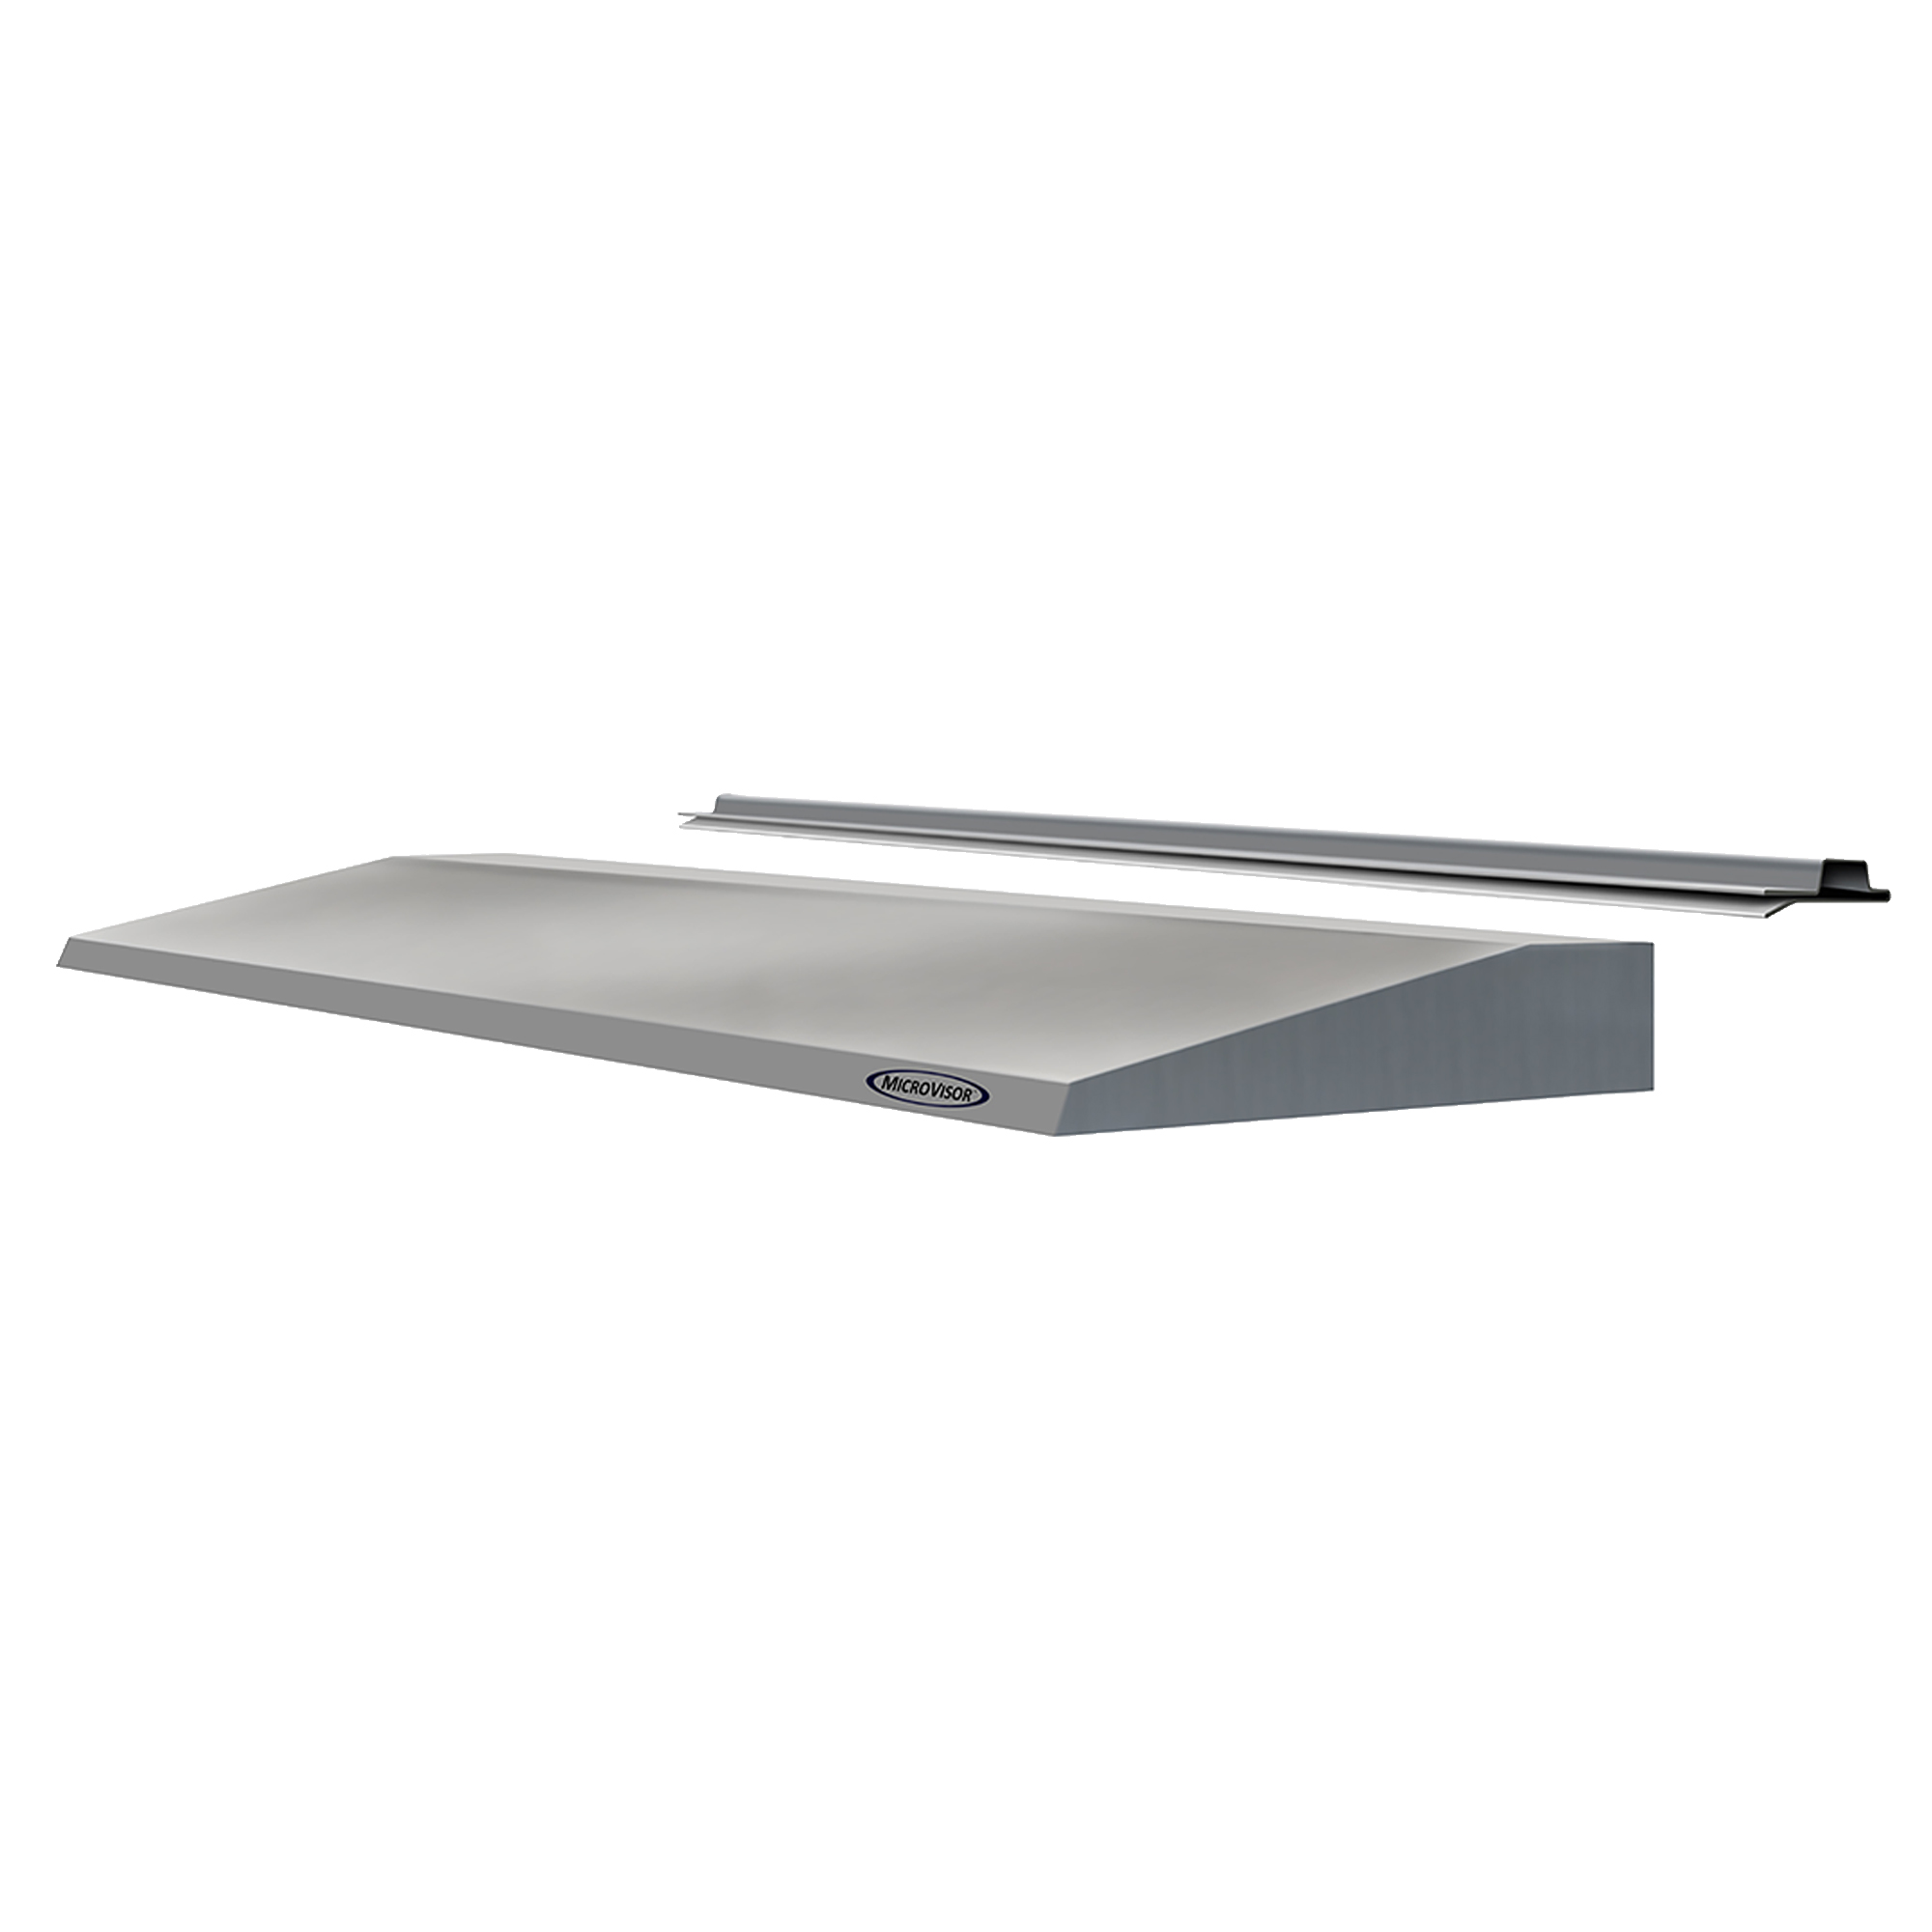 E-Cloth Stainless Steel Cloth - MICROVISOR® Extension Hood